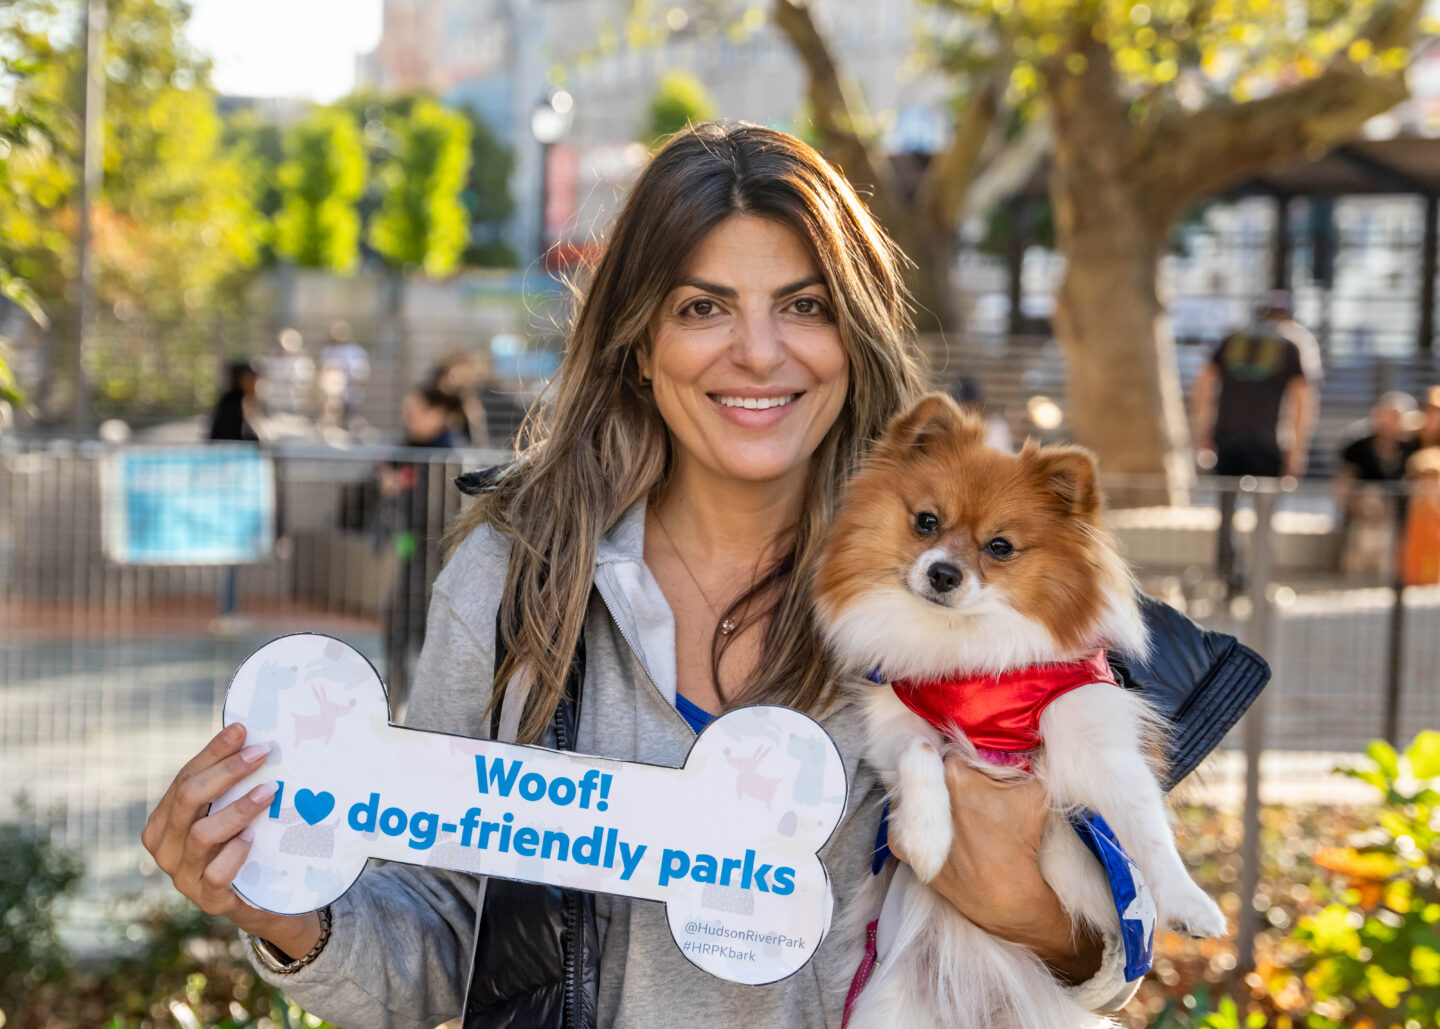 woman holding small dog and sign about dog-friendly parks smiles for camera